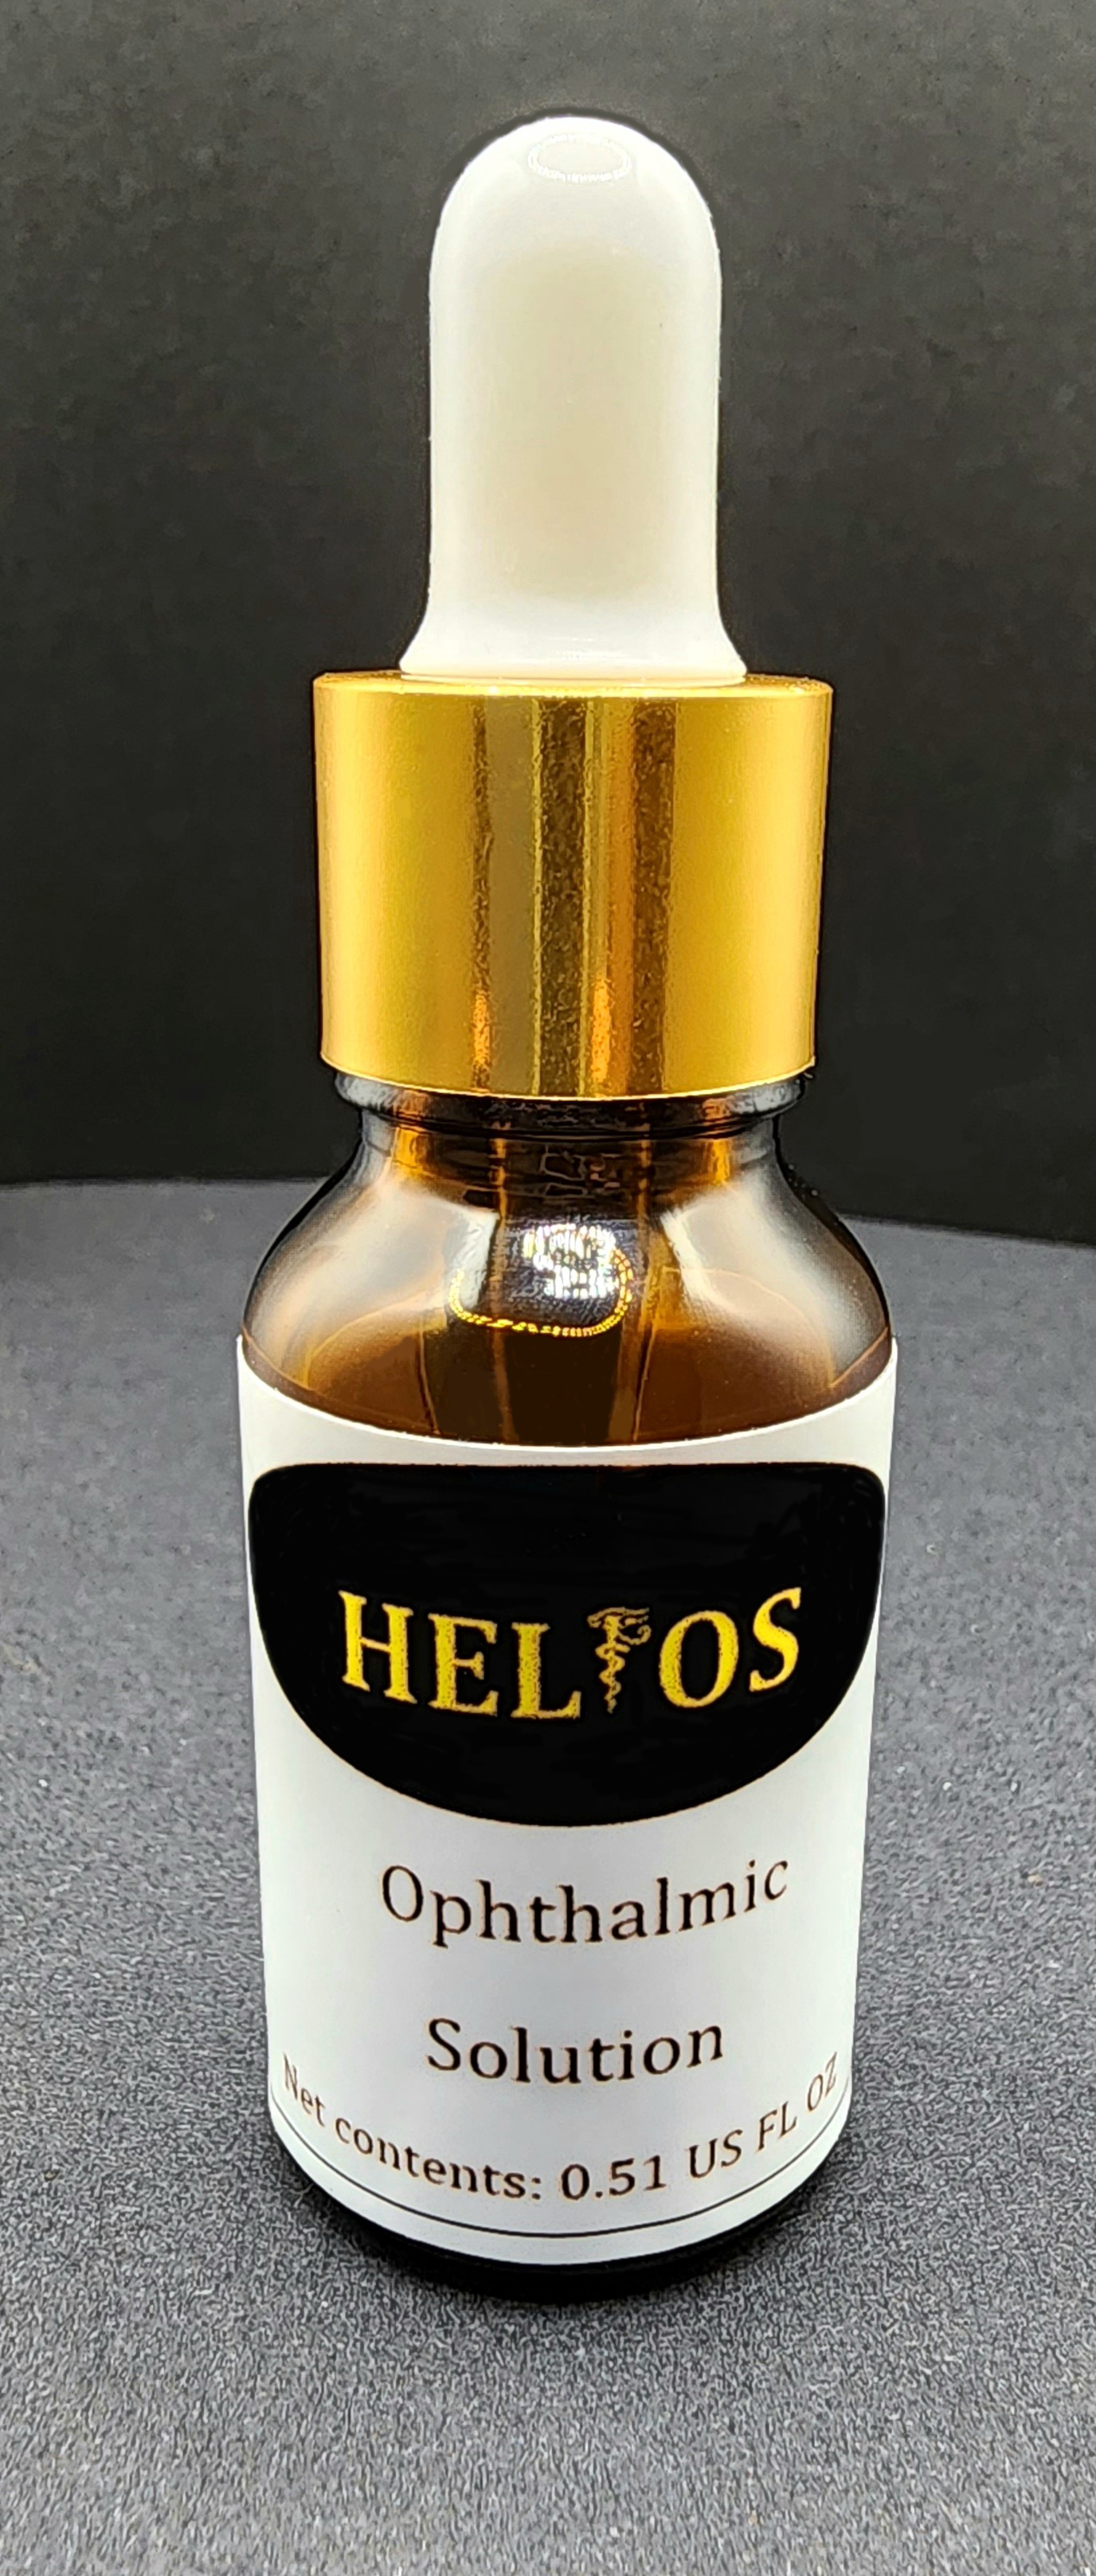 Helios Ophthalmic Solution